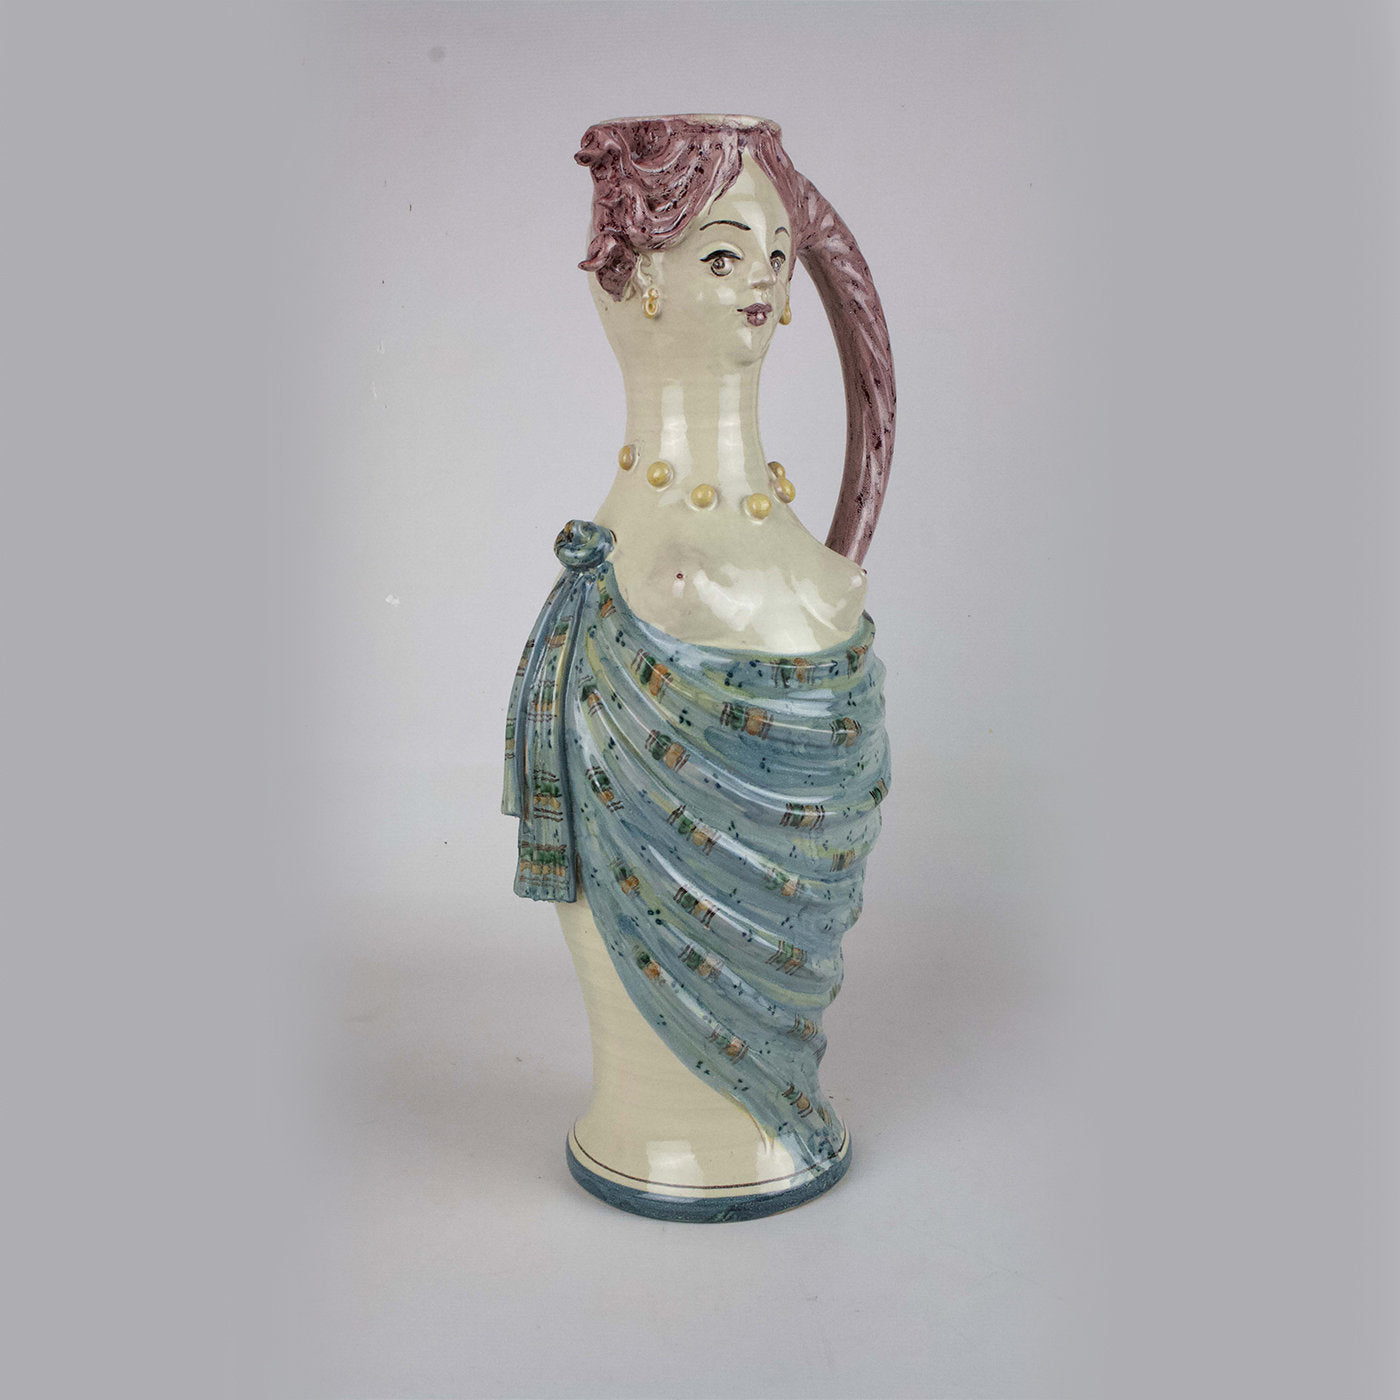 Red-Haired Woman Ceramic Jug  - Alternative view 1